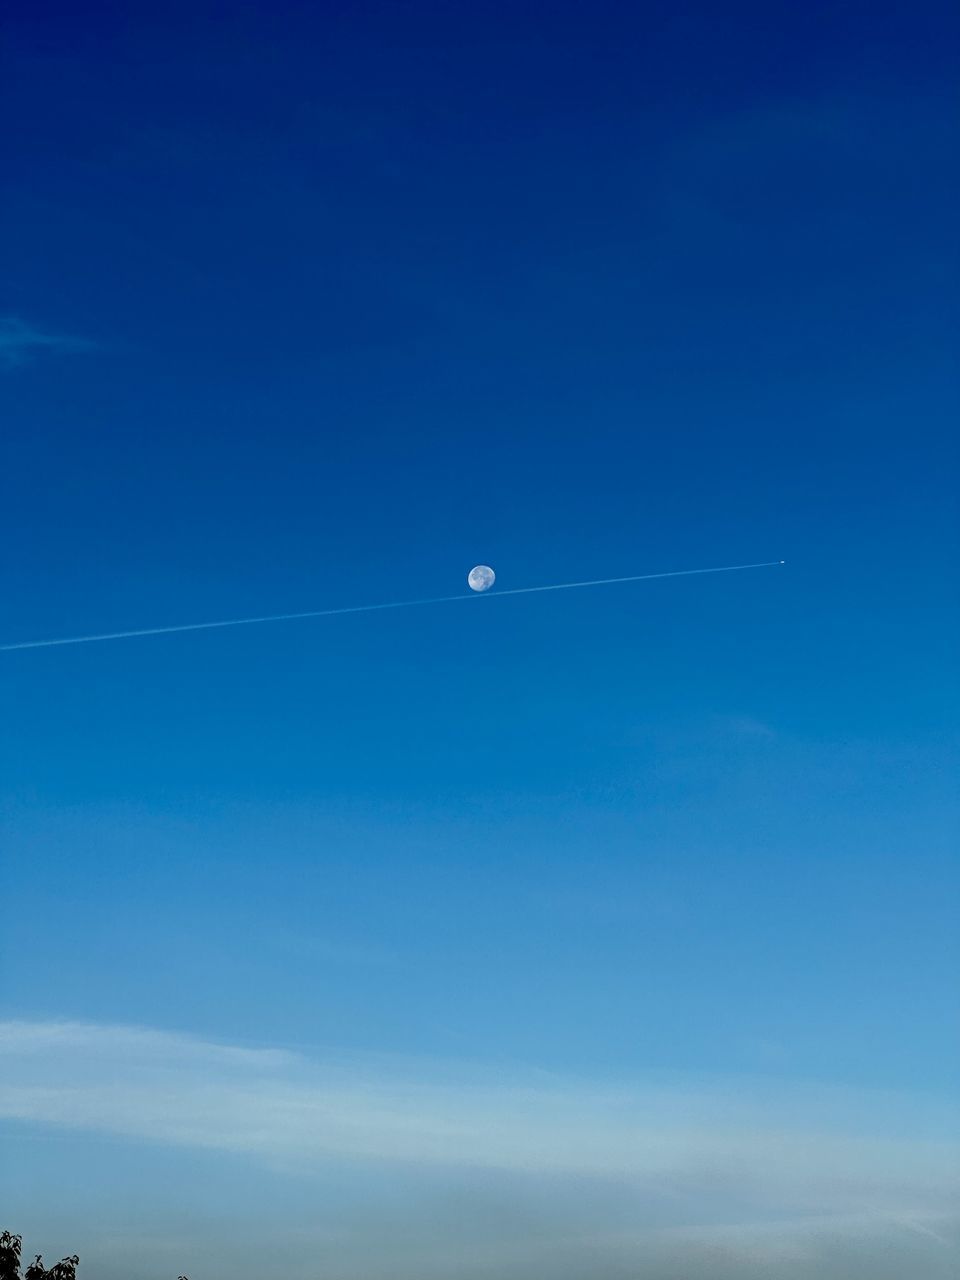 sky, blue, horizon, nature, cloud, flying, scenics - nature, beauty in nature, air vehicle, no people, vapor trail, tranquil scene, tranquility, moon, transportation, low angle view, clear sky, outdoors, copy space, mid-air, day, environment, airplane, dawn, mode of transportation, sea, astronomical object, motion